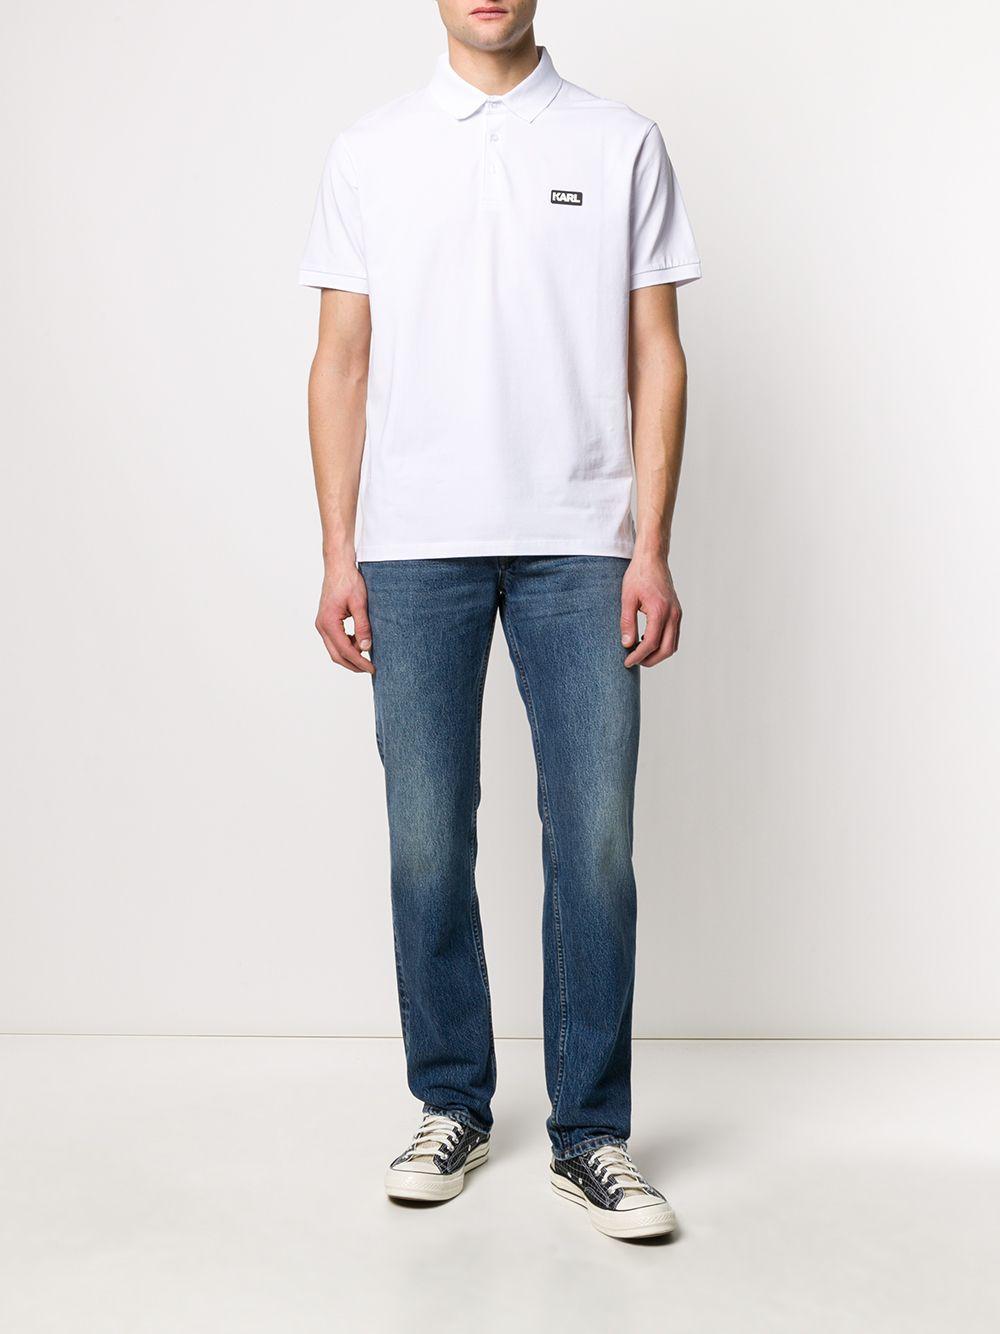 Karl Lagerfeld Cotton Logo Patch Polo Shirt in White for Men - Lyst